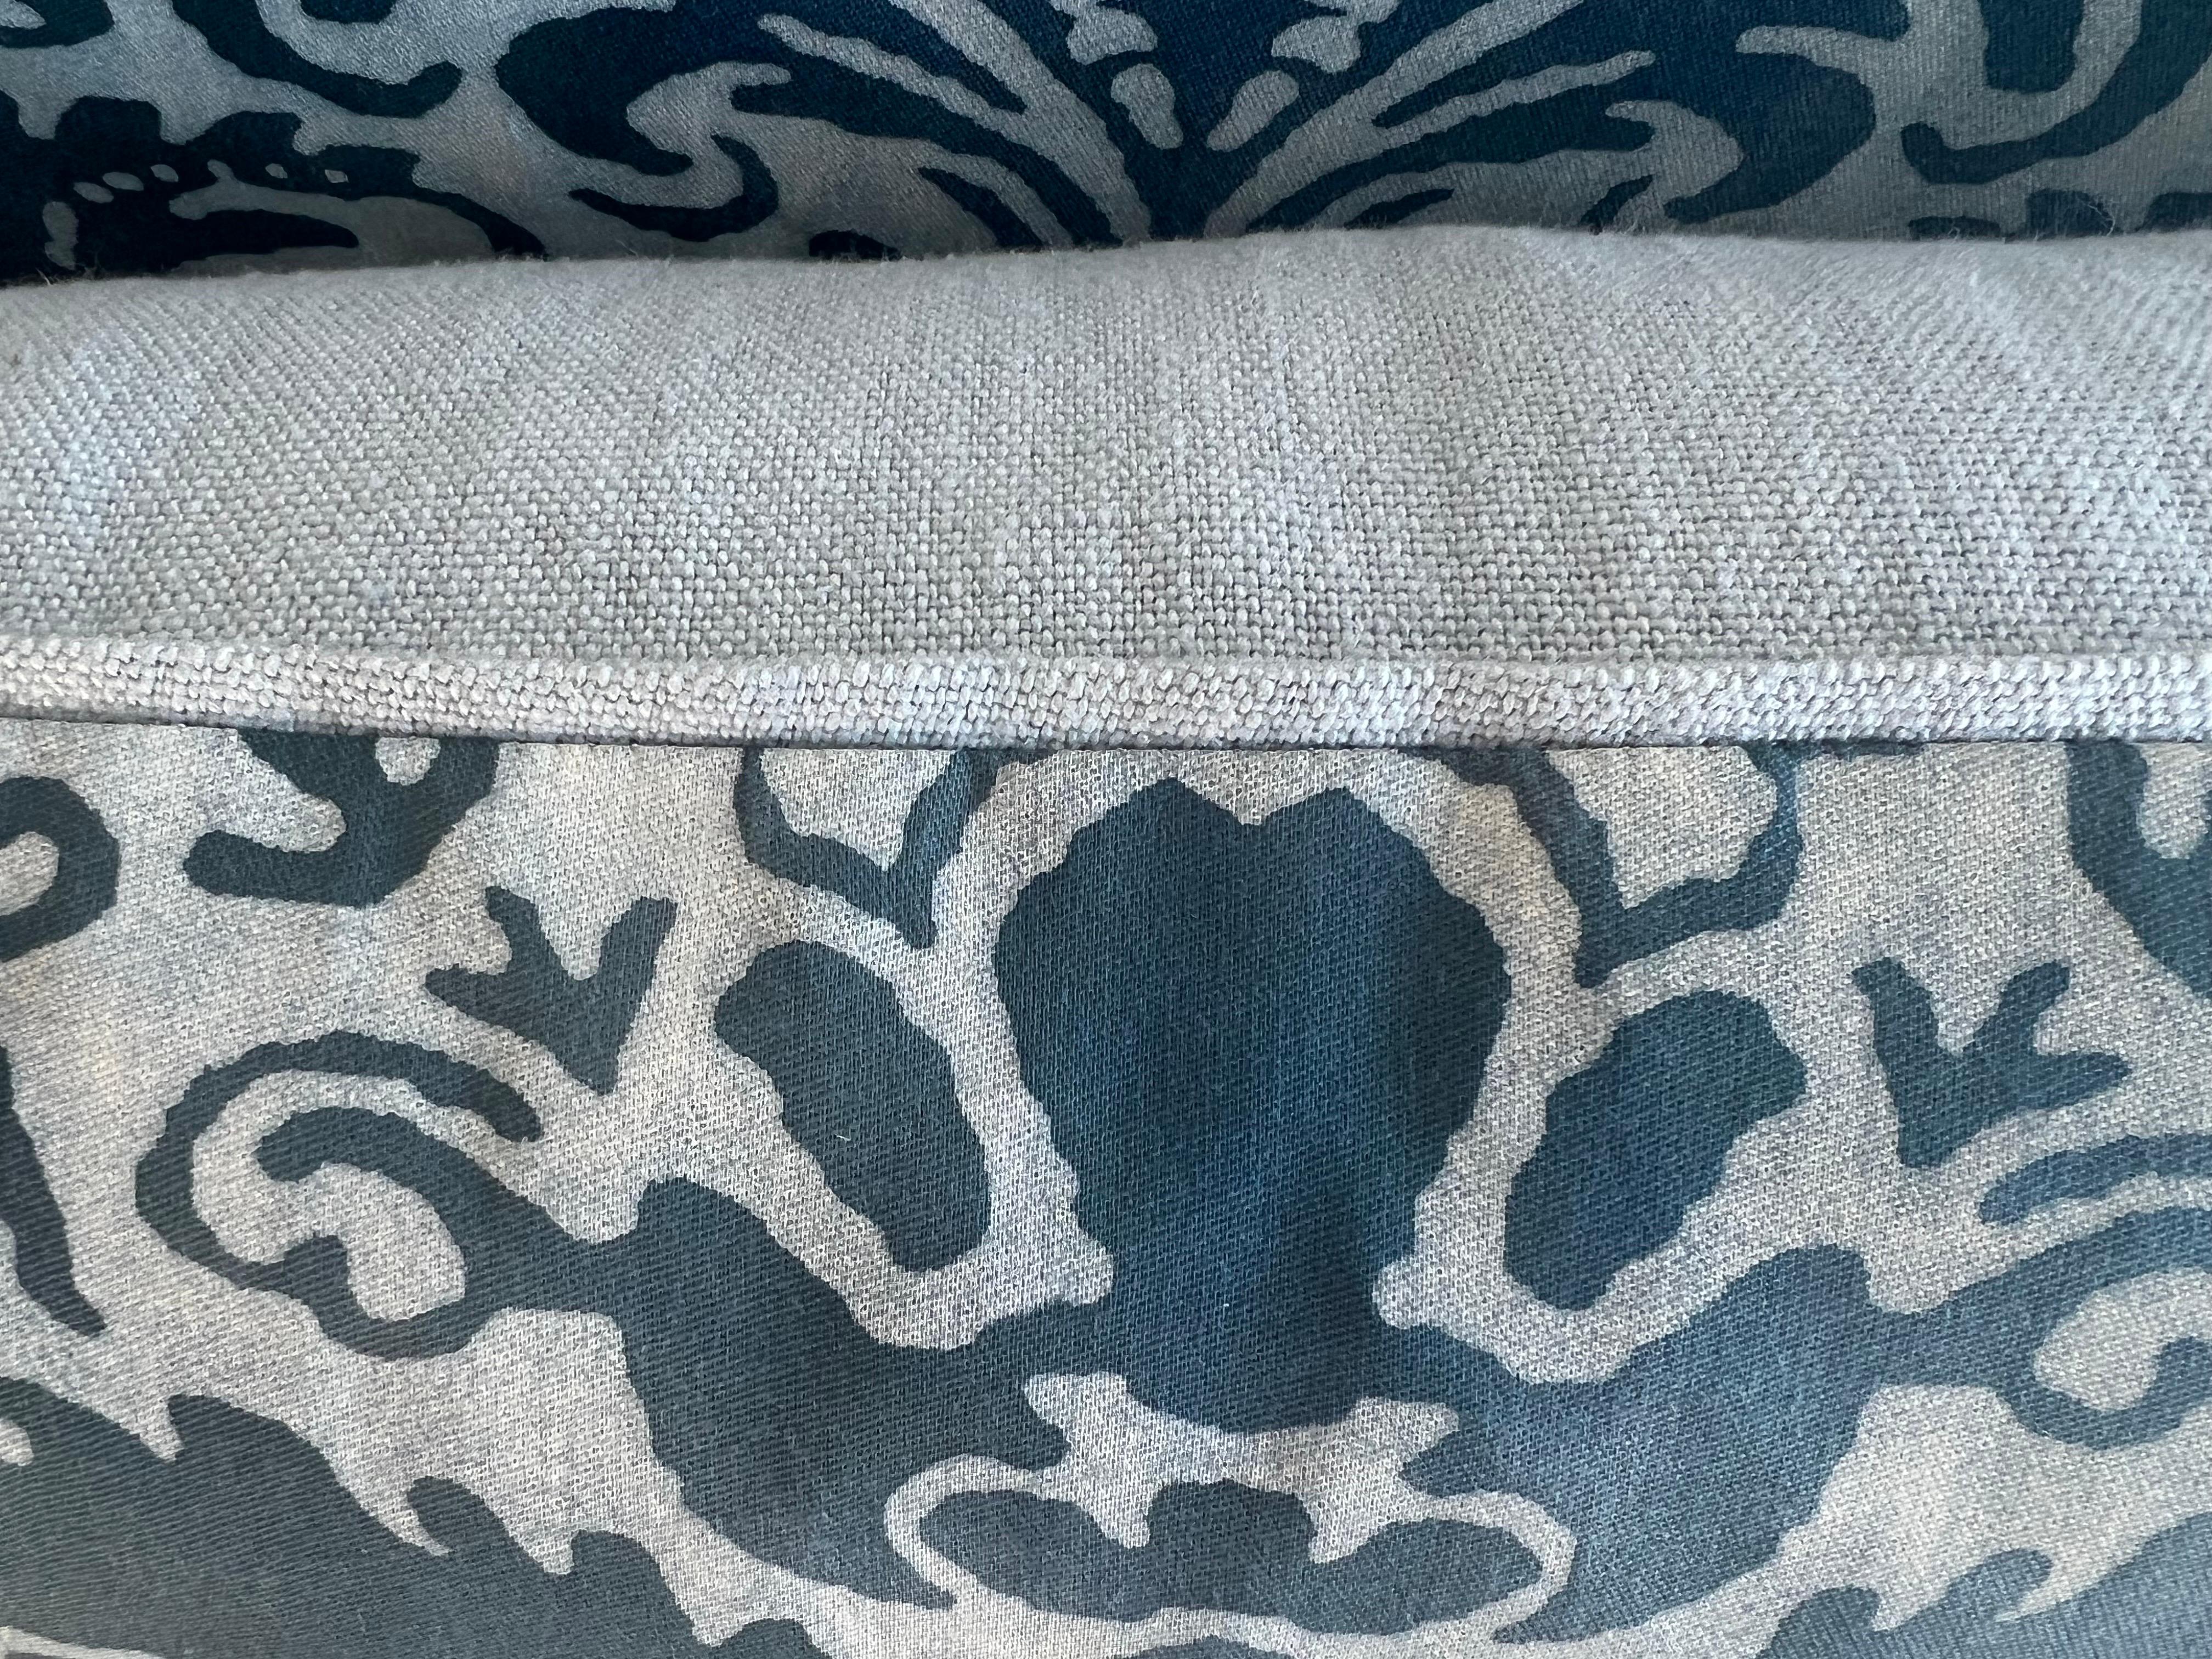 Pair of Blue Caravaggio Patterned Fortuny Pillows In Excellent Condition For Sale In Los Angeles, CA